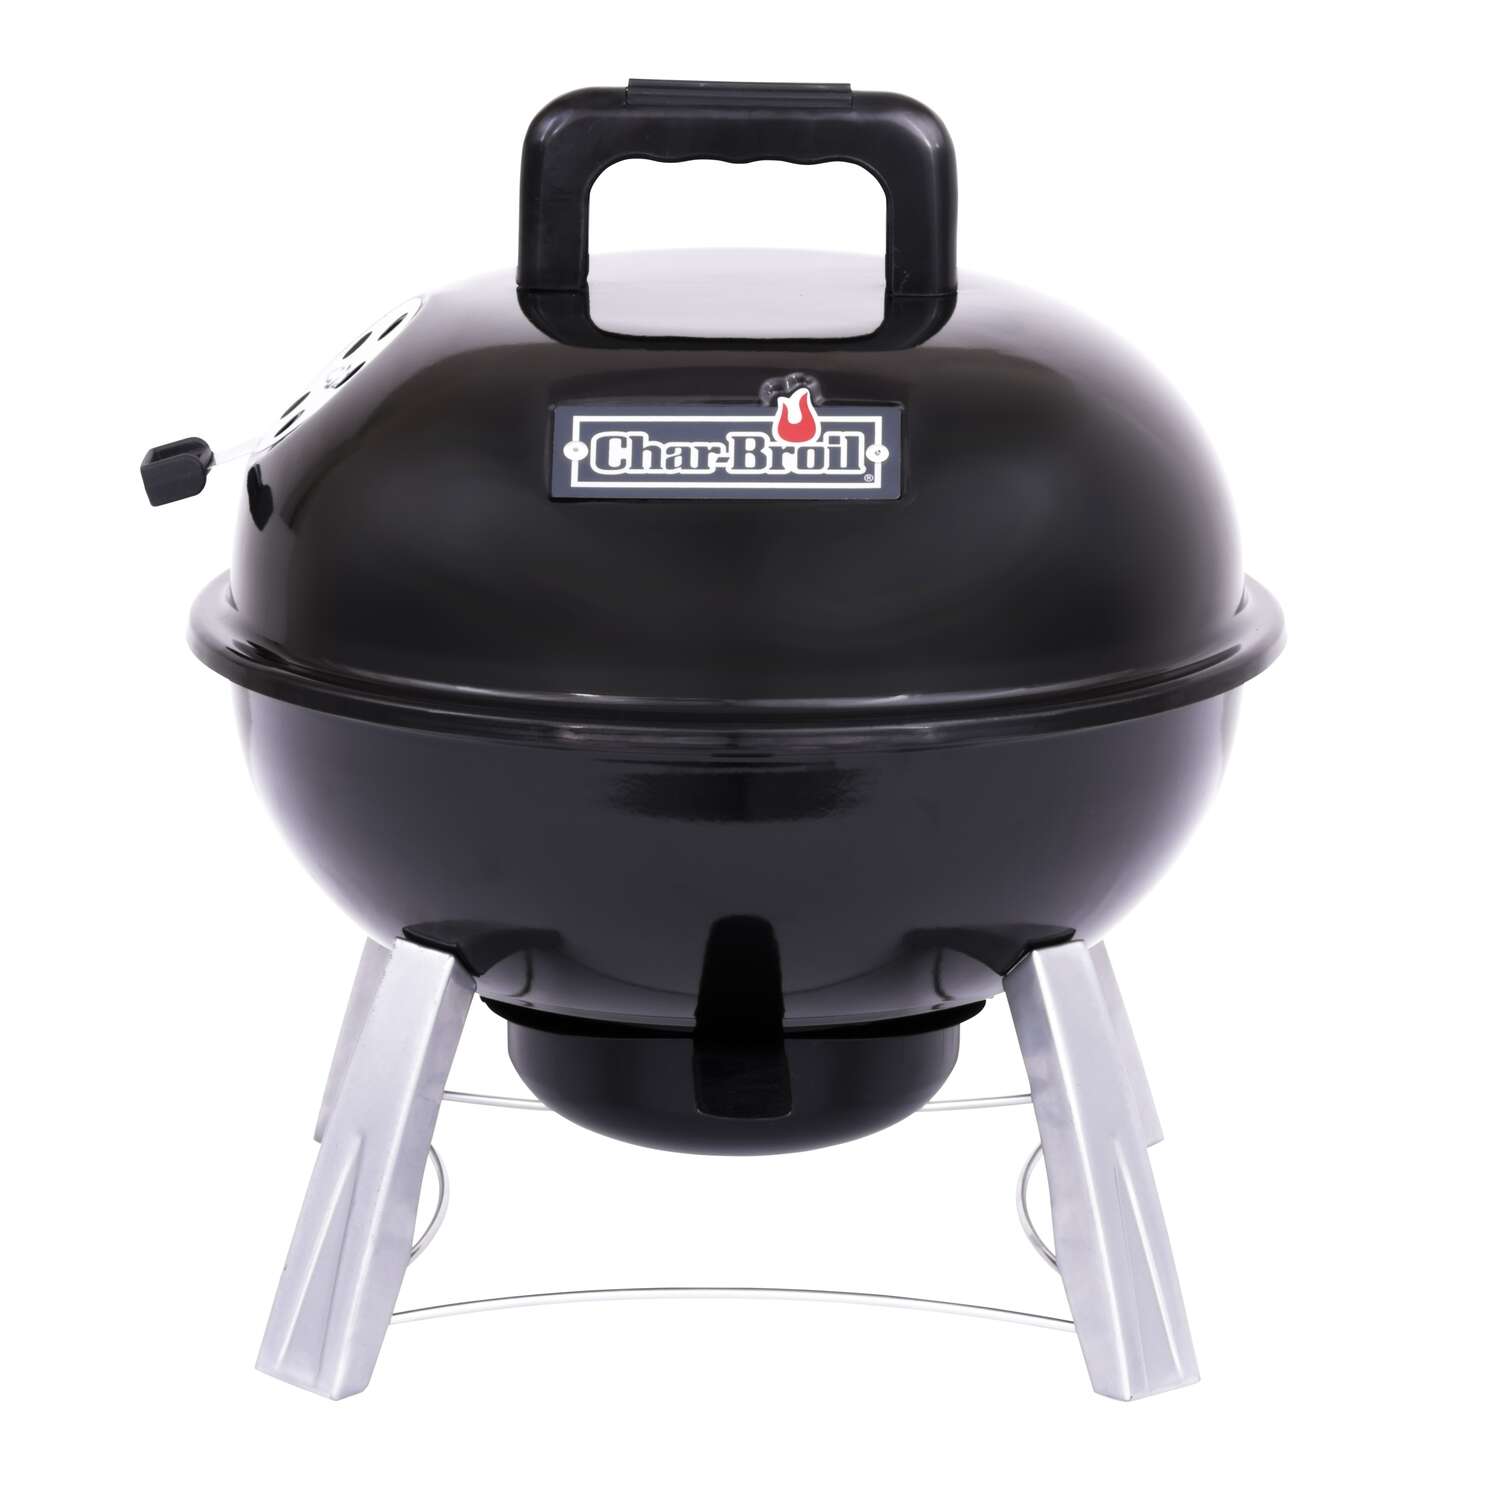 CharBroil Charcoal Grill Black Ace Hardware